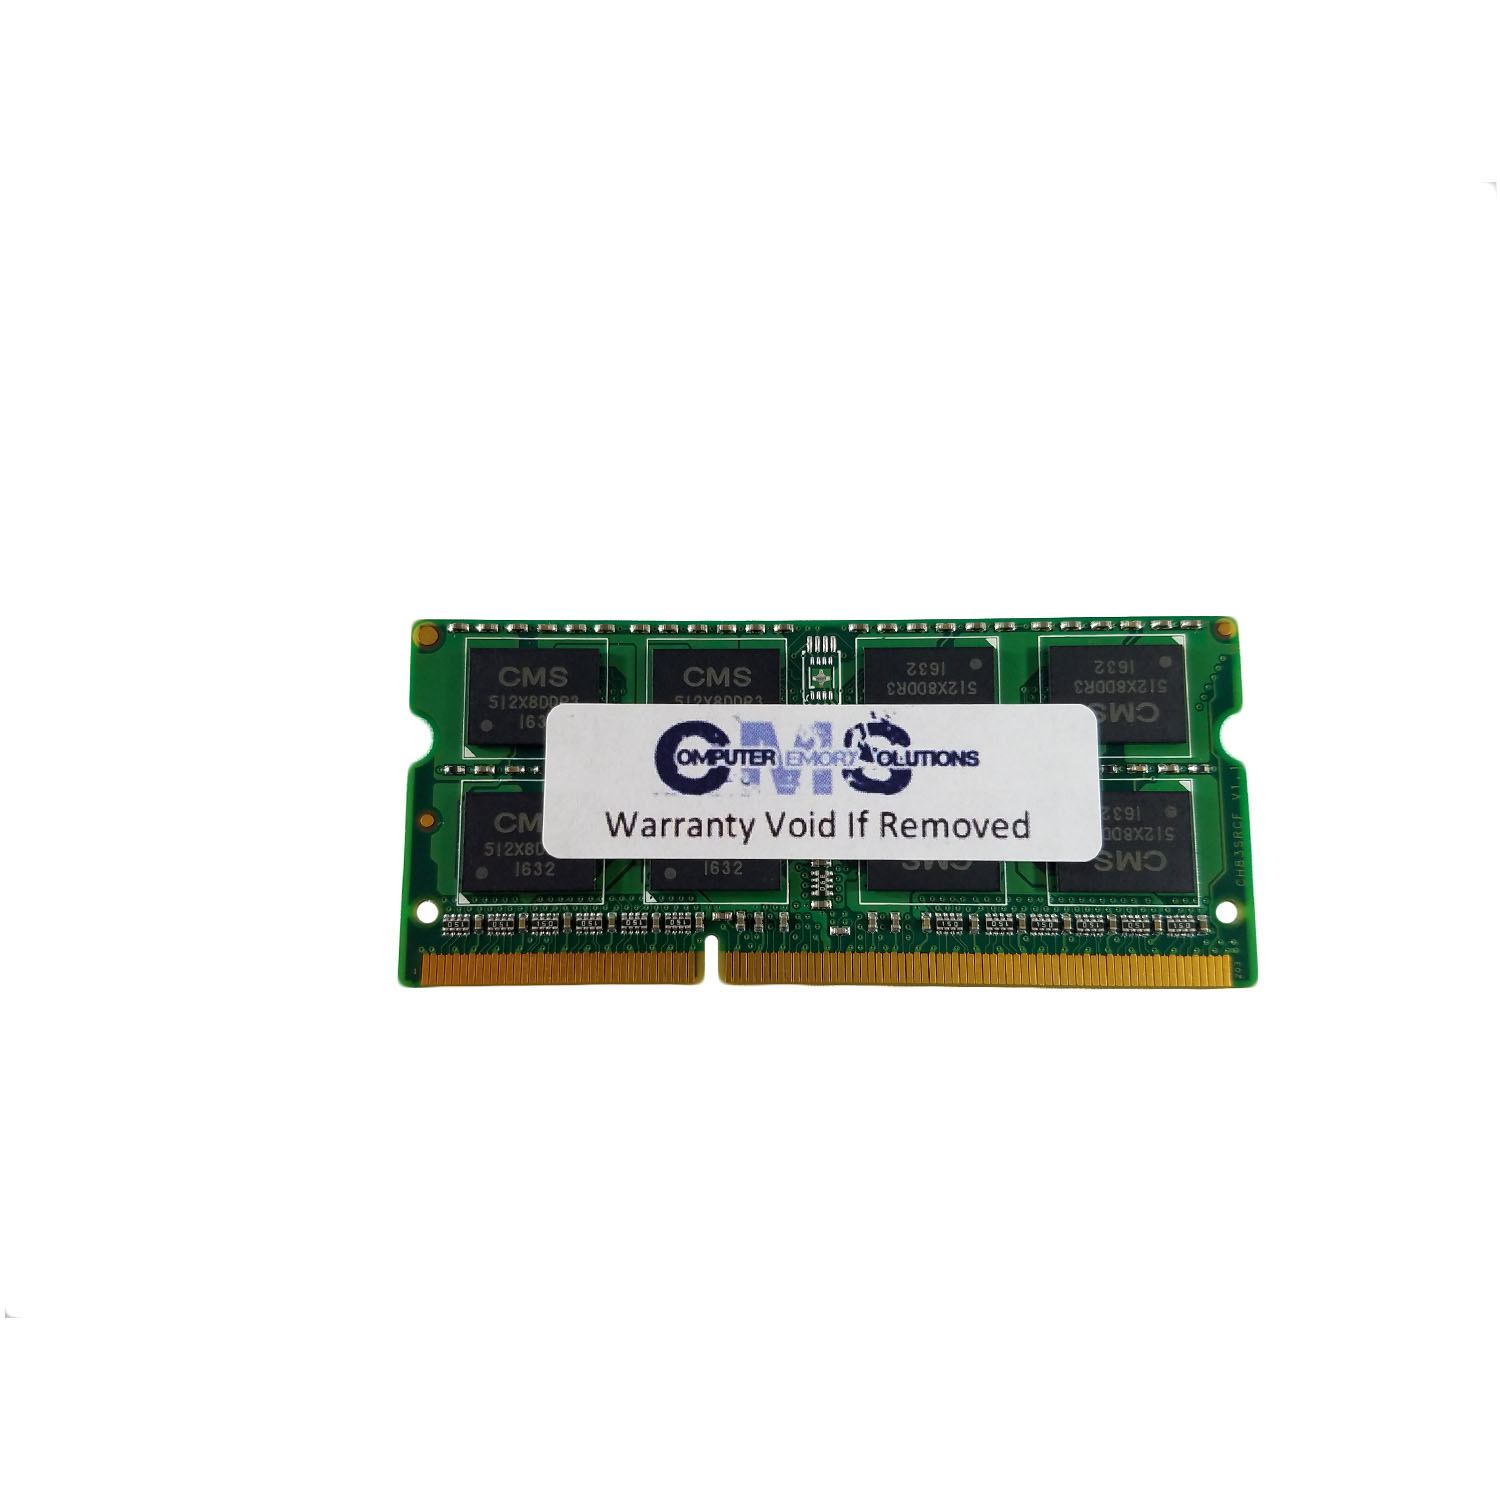 CMS 2GB (1X2GB) DDR3 8500 1066MHZ NON ECC SODIMM Memory Ram Upgrade Compatible with Toshiba® Mini Notebook Nb520 Series (Ddr3) - B123 - image 1 of 3